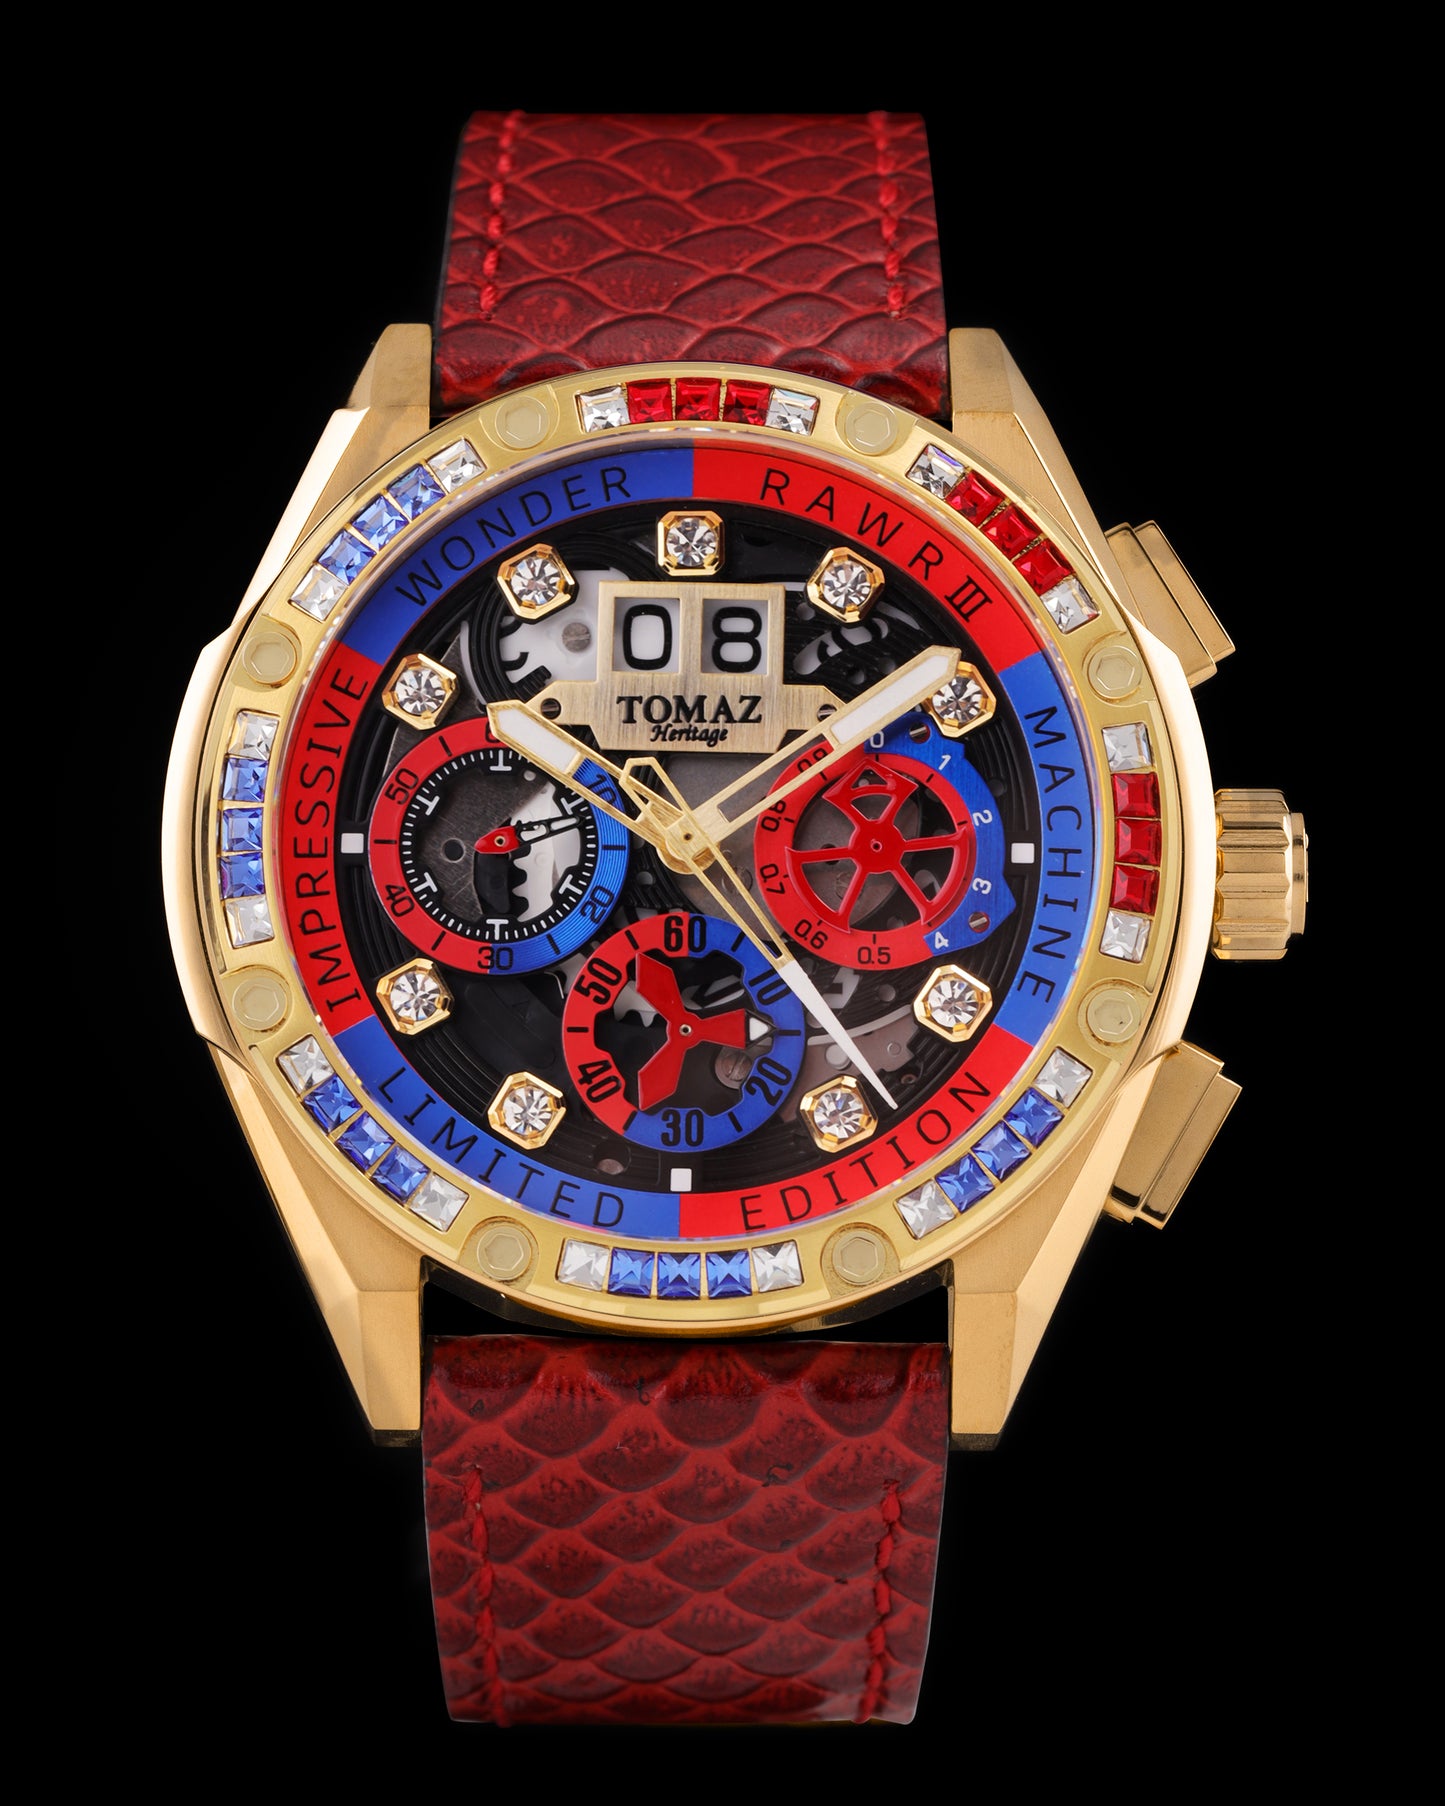 RAWR III TW024I-D10 (Gold) with Blue Red Yellow Swarovski (Red Salmon Leather Strap)